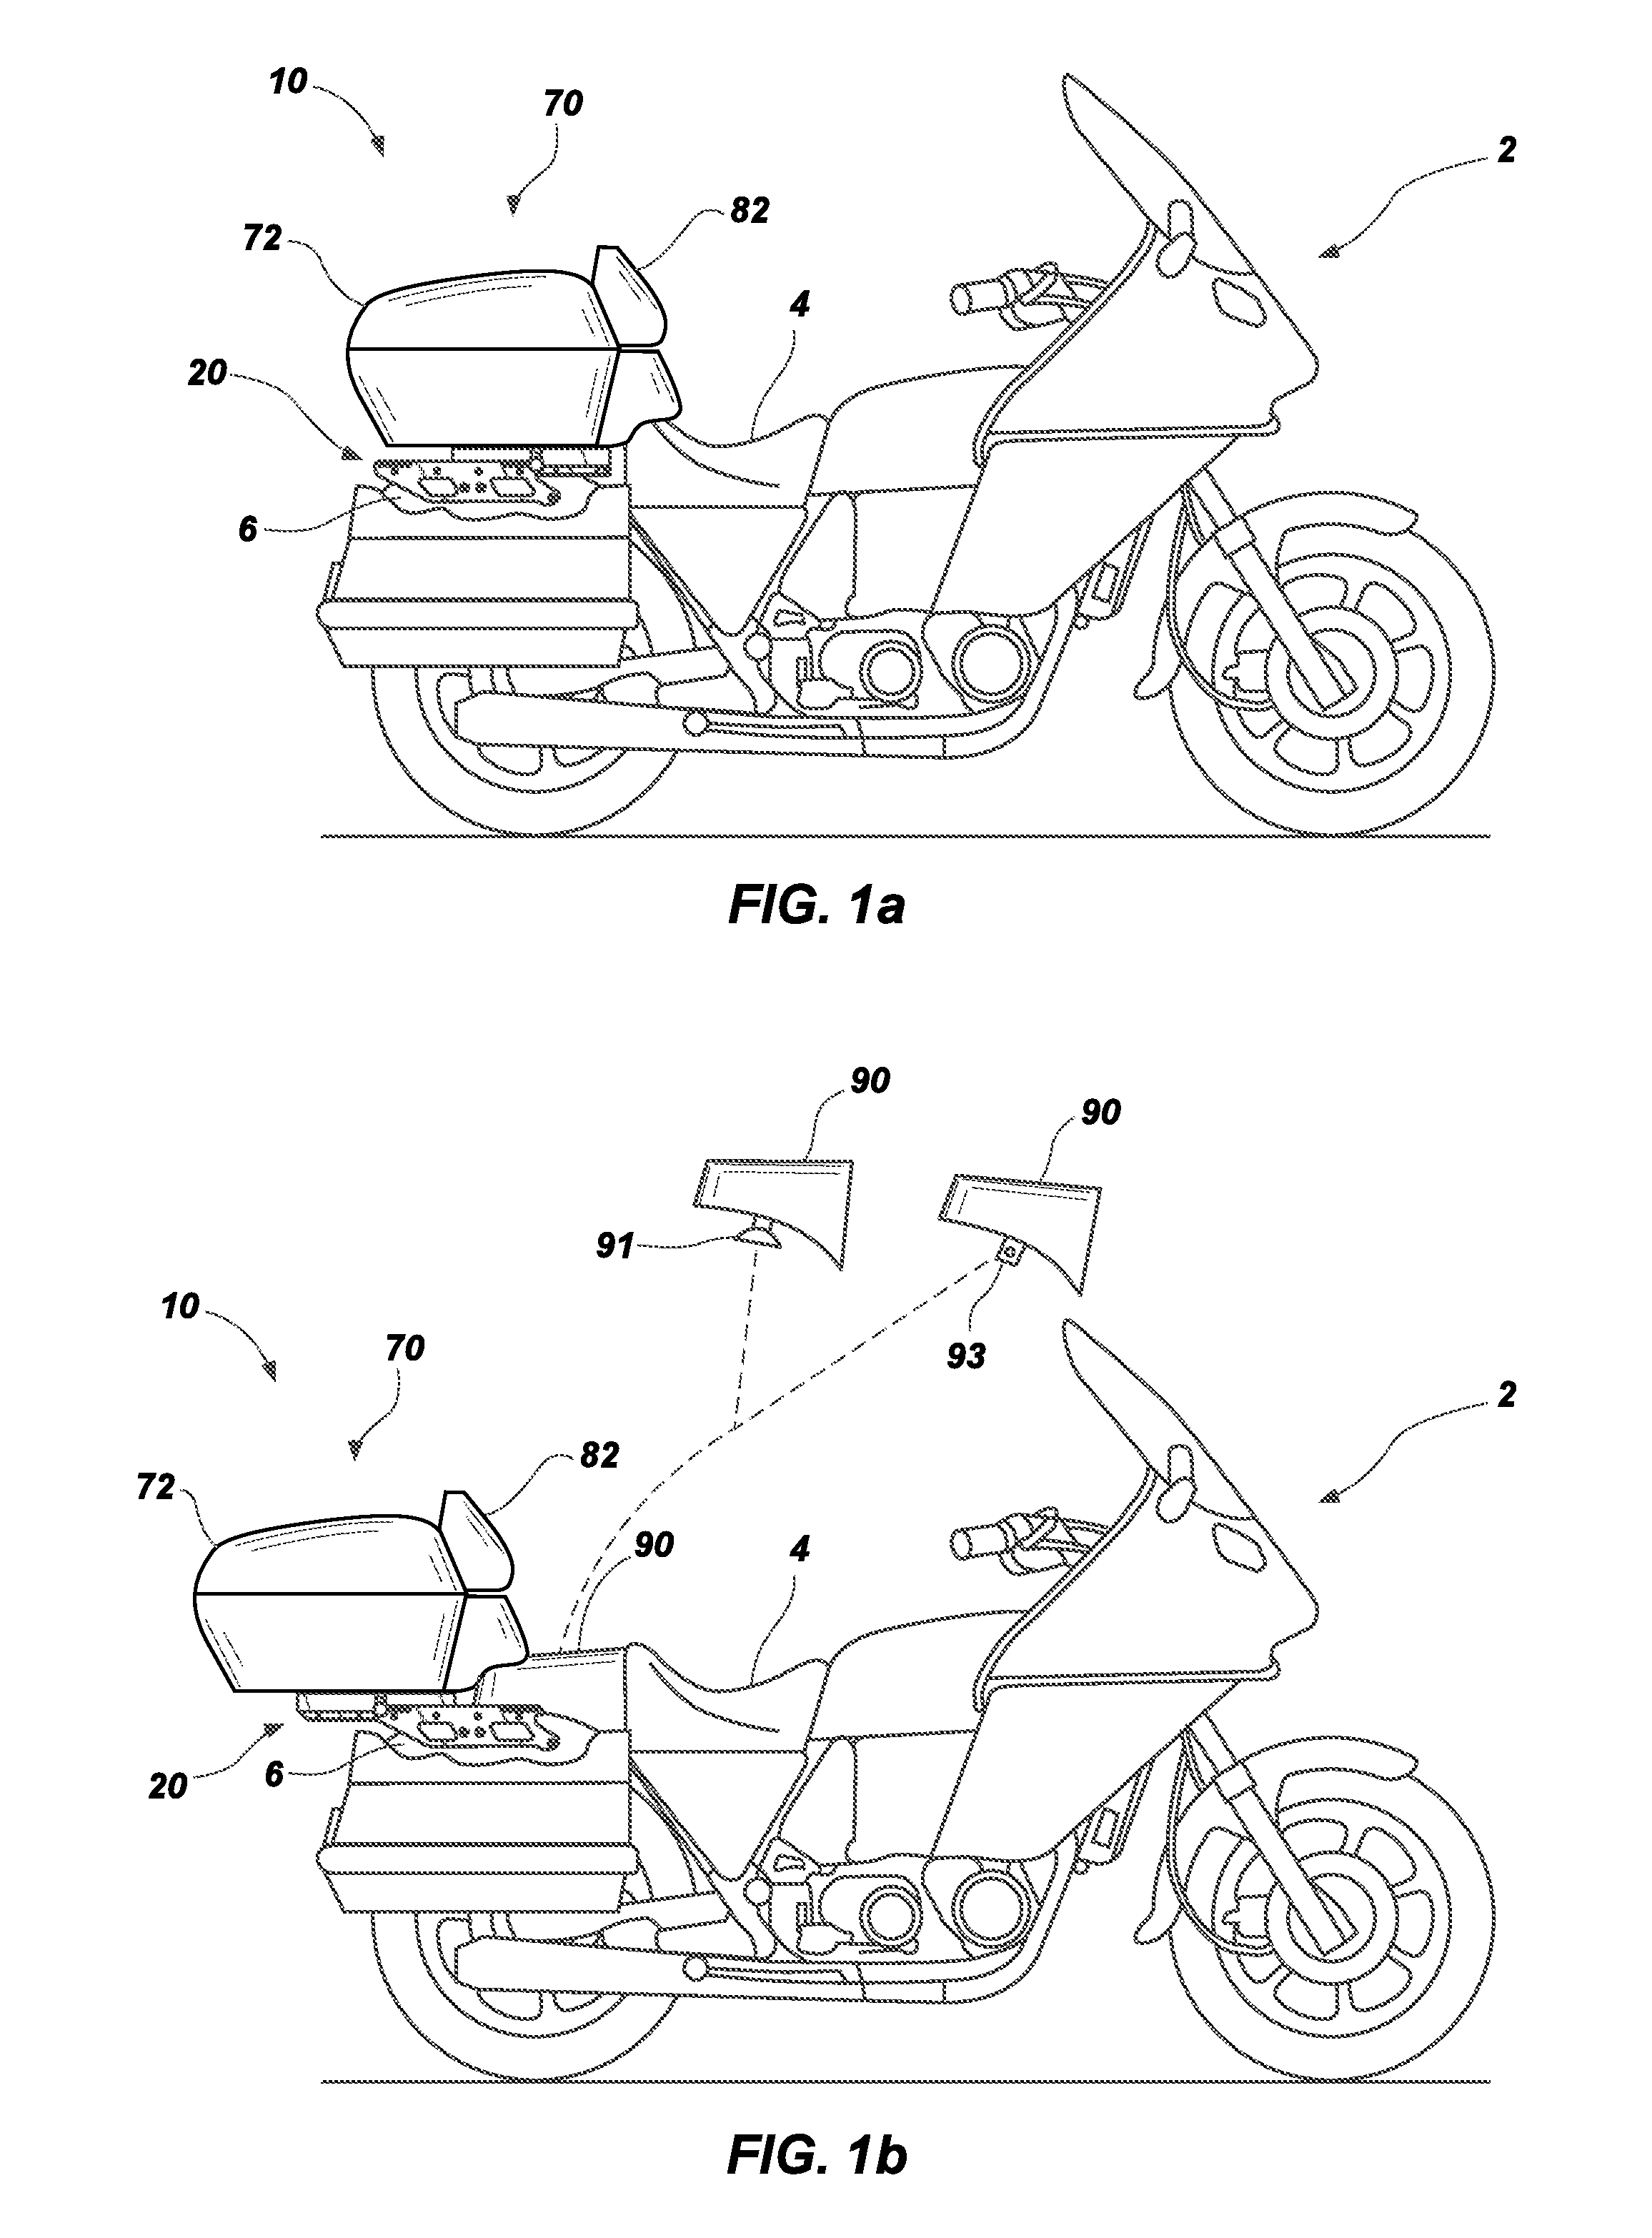 Displaceable utility positioning system for motorcycles